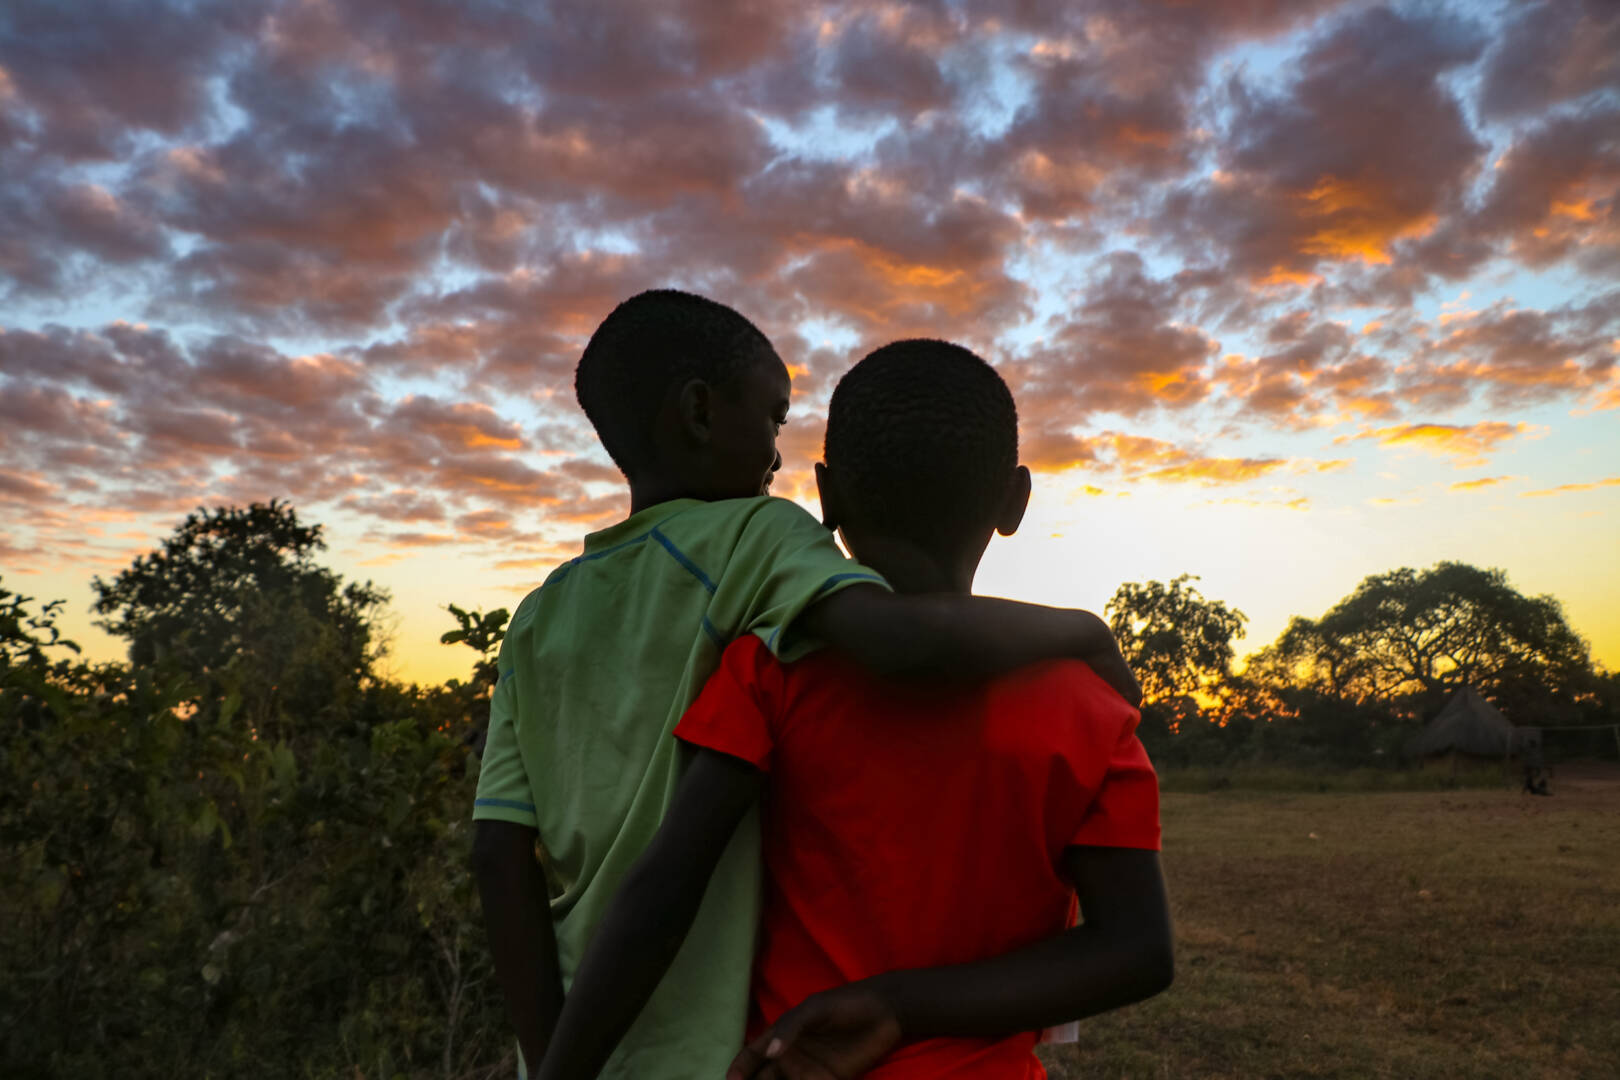 Brothers Francis and Billy gaze into a brighter future thanks to World Vision’s Gift Catalog goats that have transformed their family’s lives.